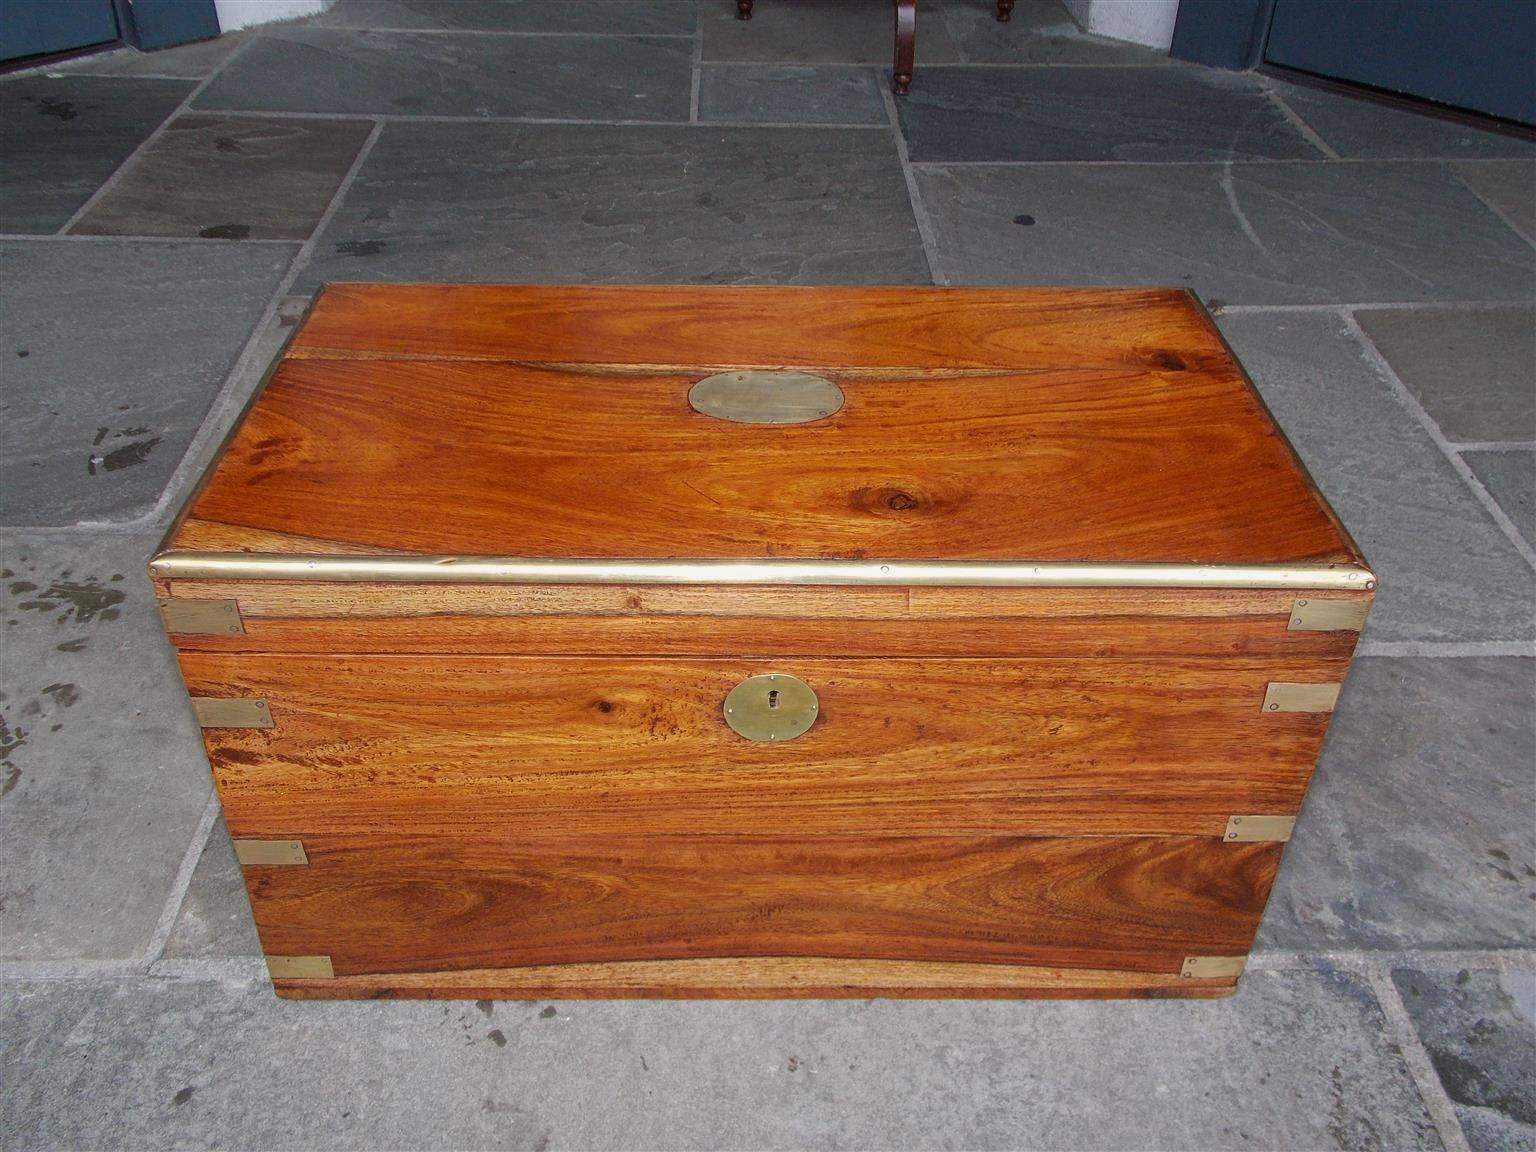 English camphor wood hinged export trunk with exterior brass bandings, original brass mounts, working keys, and circular brass plates with escutcheons, Early 19th Century.